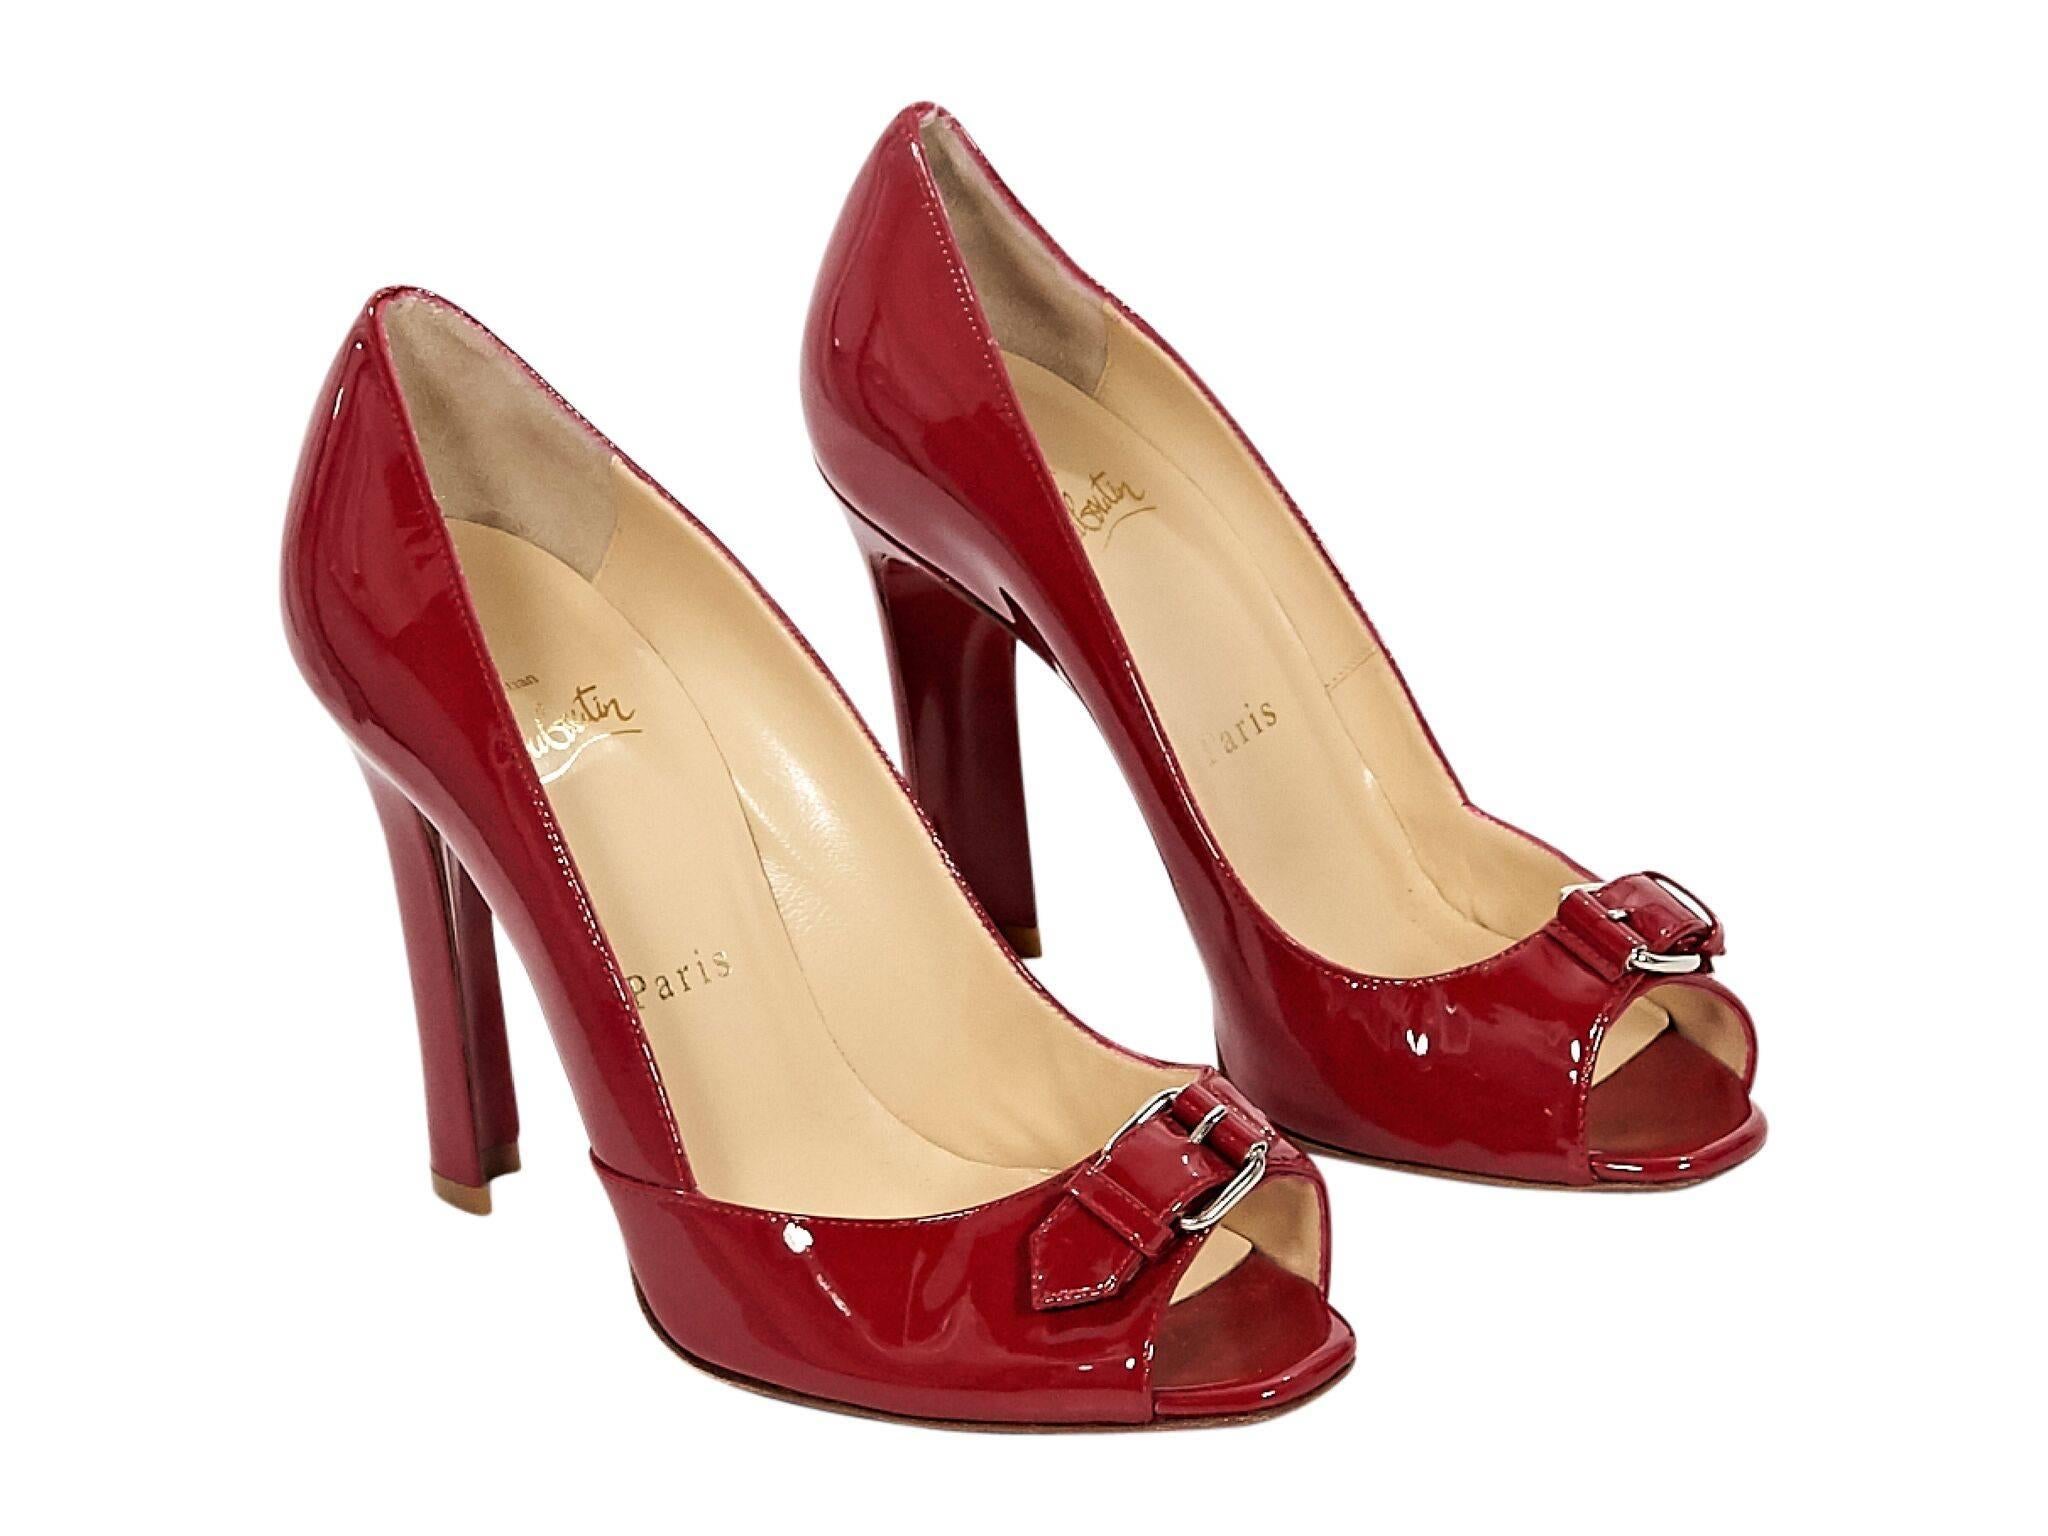 Product details:  Red patent leather pumps by Christian Louboutin.  Buckle detail accents vamp.  Peep toe.  Iconic red sole.  Slip-on style.
Condition: Pre-owned. Very good. 
Est. Retail $835